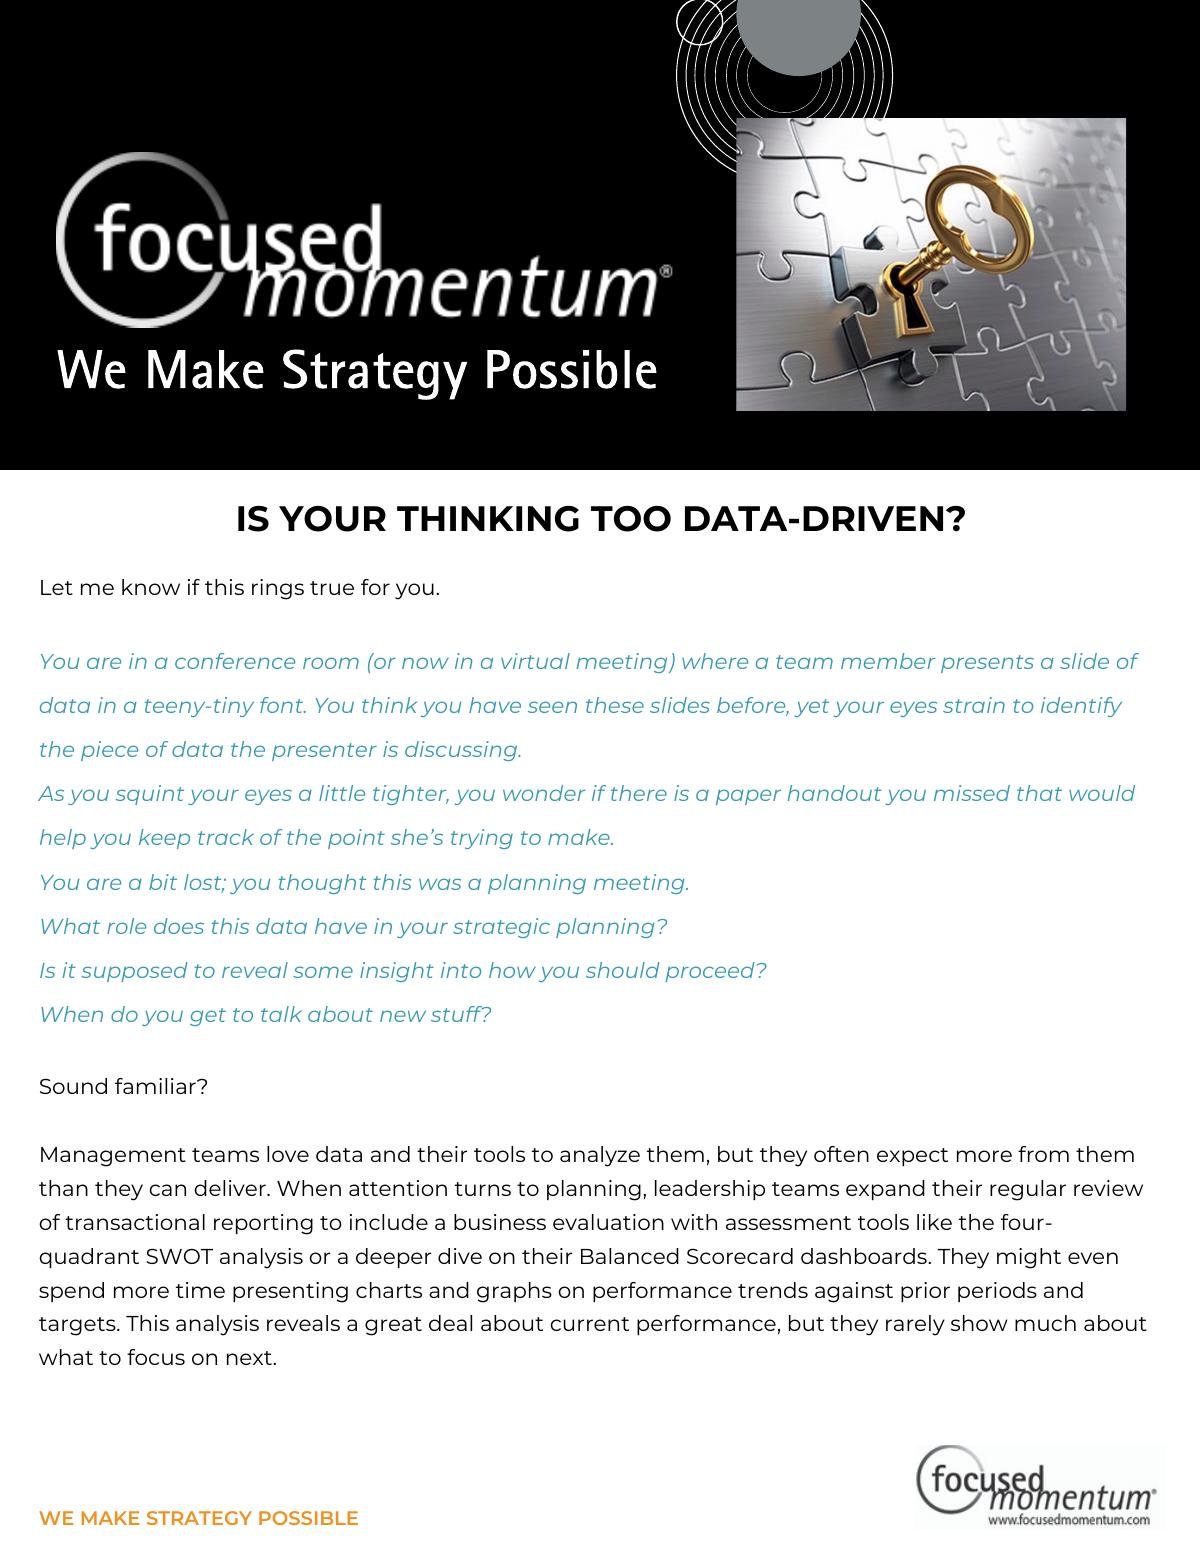 Is Your Thinking Too Data-Driven?